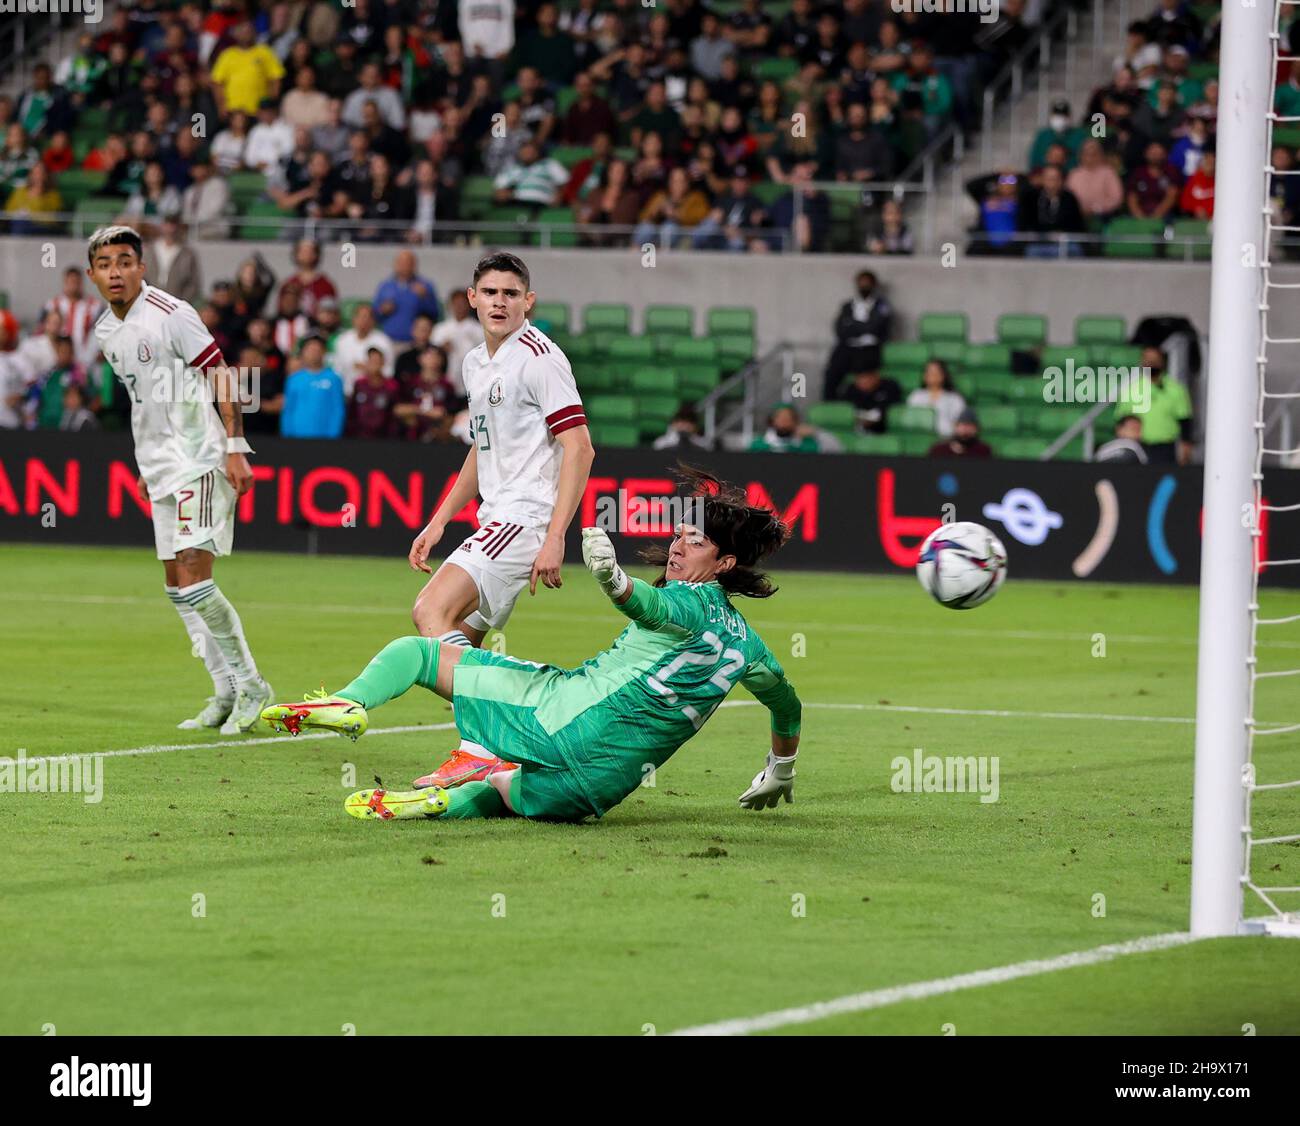 Austin, Texas, USA. December 8, 2021: Mexico goalkeeper CARLOS ACEVEDO LOPEZ (23) watches as a shot from Chile midfielder MACELO ALLENDE (13) goes into the net for an equalizing goal in the 86th minute of an international friendly soccer match between Mexico and Chile on December 8, 2021 in Austin, Texas. (Credit Image: © Scott Coleman/ZUMA Press Wire) Credit: ZUMA Press, Inc./Alamy Live News Stock Photo